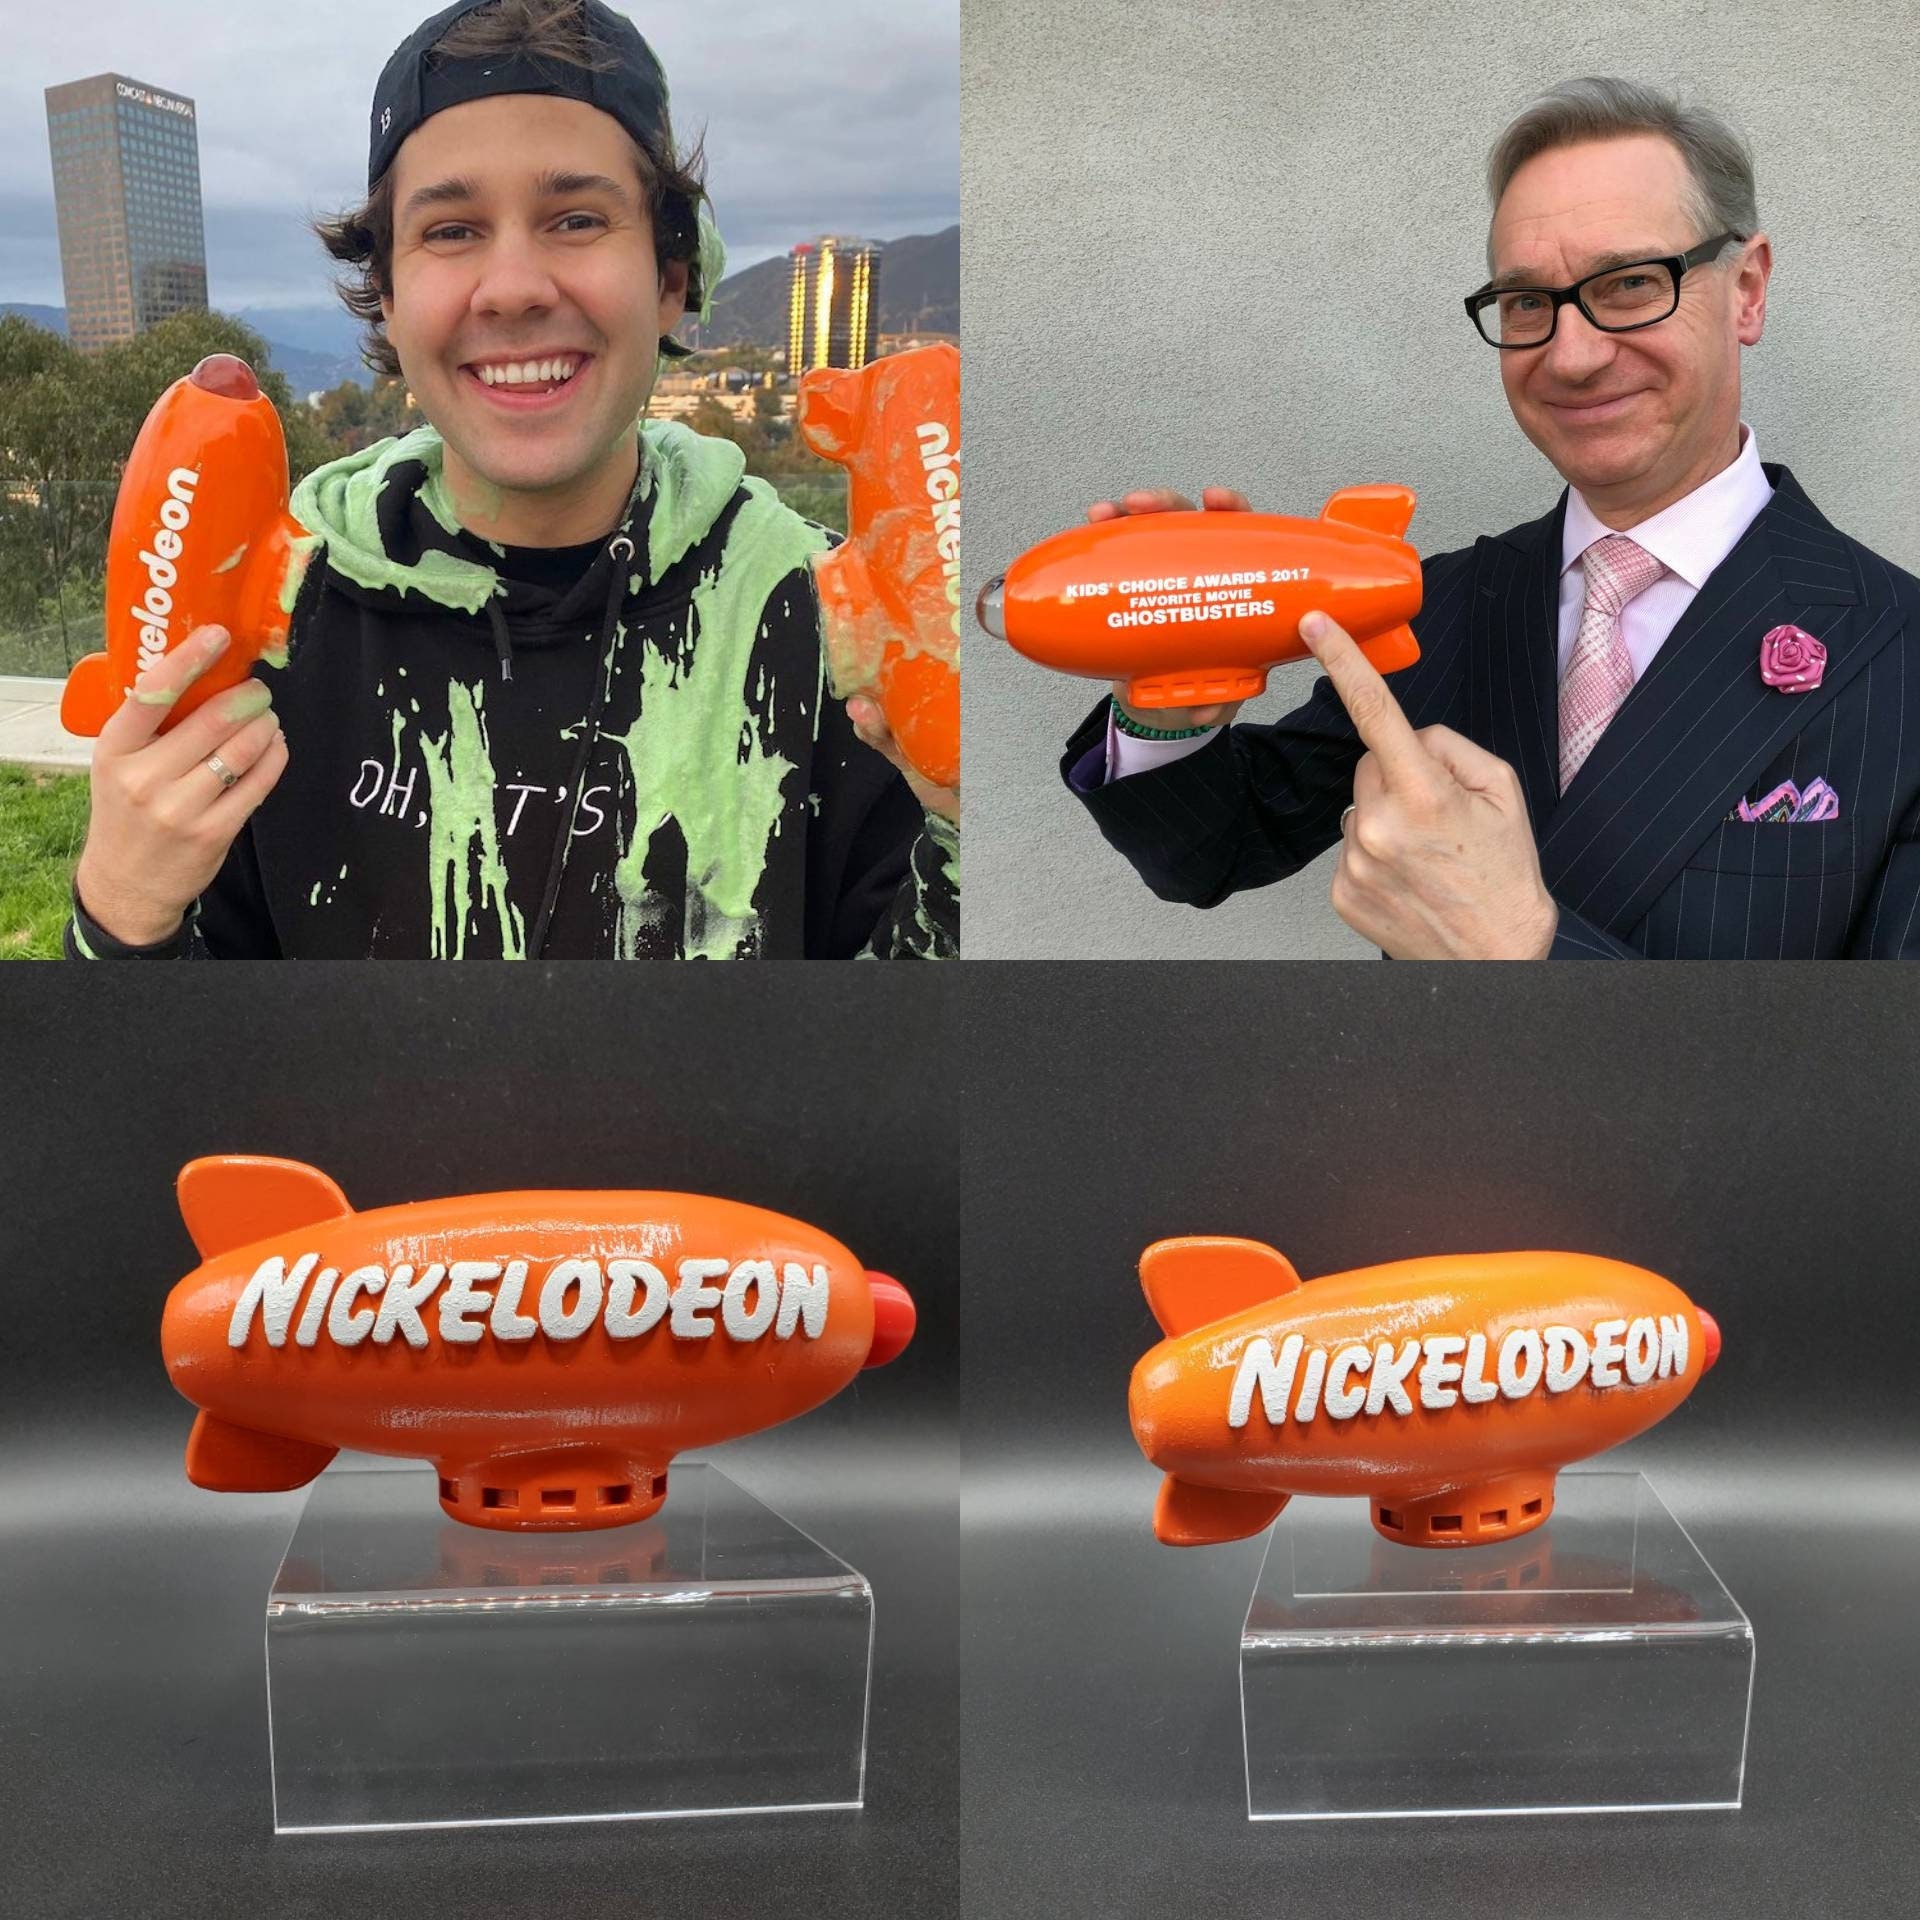 Nickelodeon Kids Choice Awards Blimp Blimp Trophy hq picture